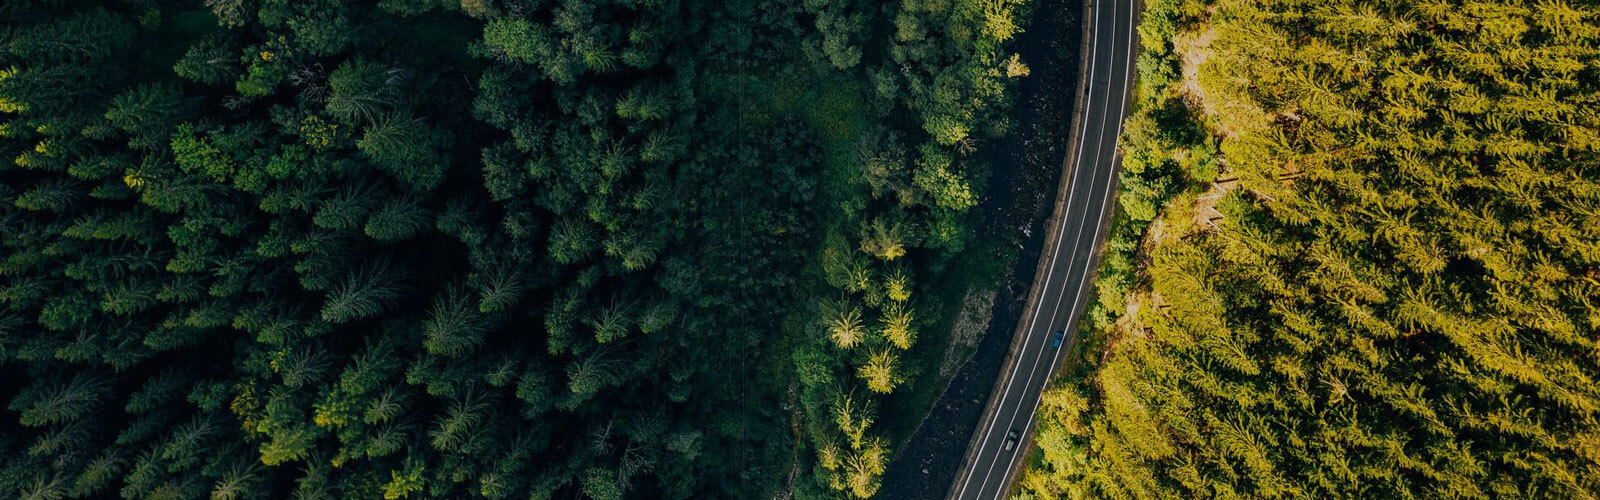 A photo of a highway zoomed out in the middle of a forest